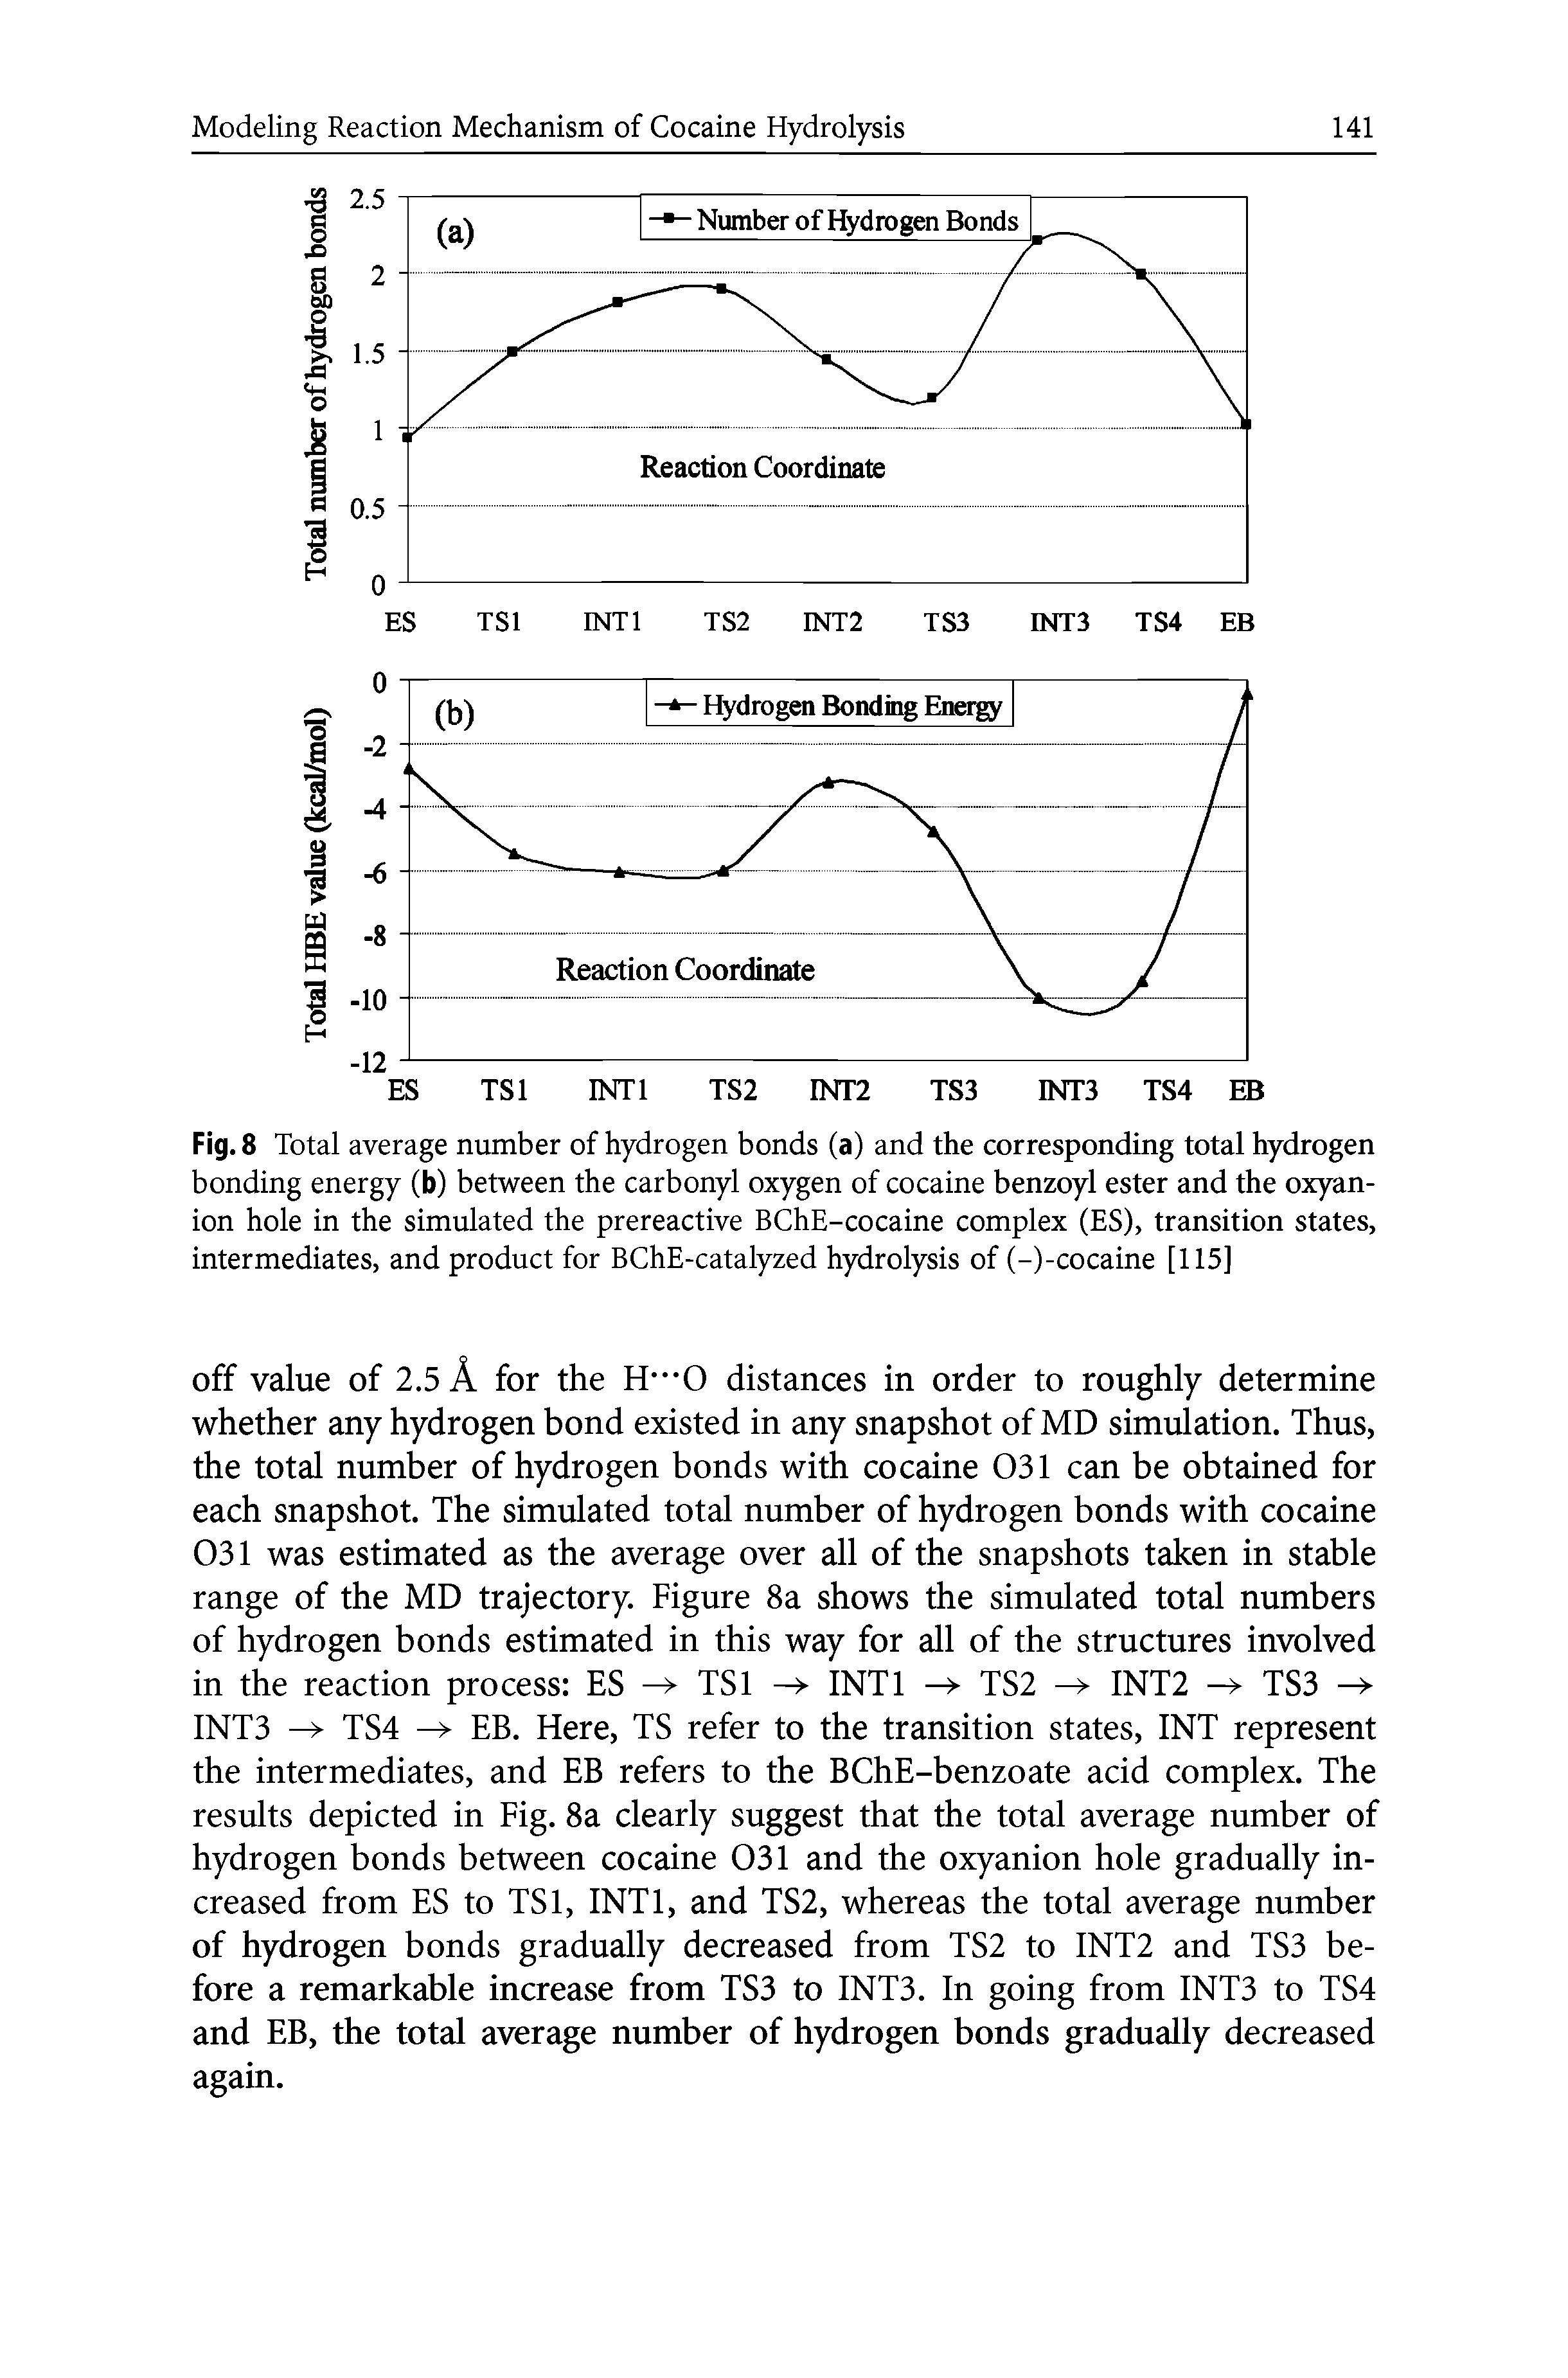 Fig. 8 Total average number of hydrogen bonds (a) and the corresponding total hydrogen bonding energy (b) between the carbonyl oxygen of cocaine benzoyl ester and the oxyan-ion hole in the simulated the prereactive BChE-cocaine complex (ES), transition states, intermediates, and product for BChE-catalyzed hydrolysis of (-)-cocaine [115]...